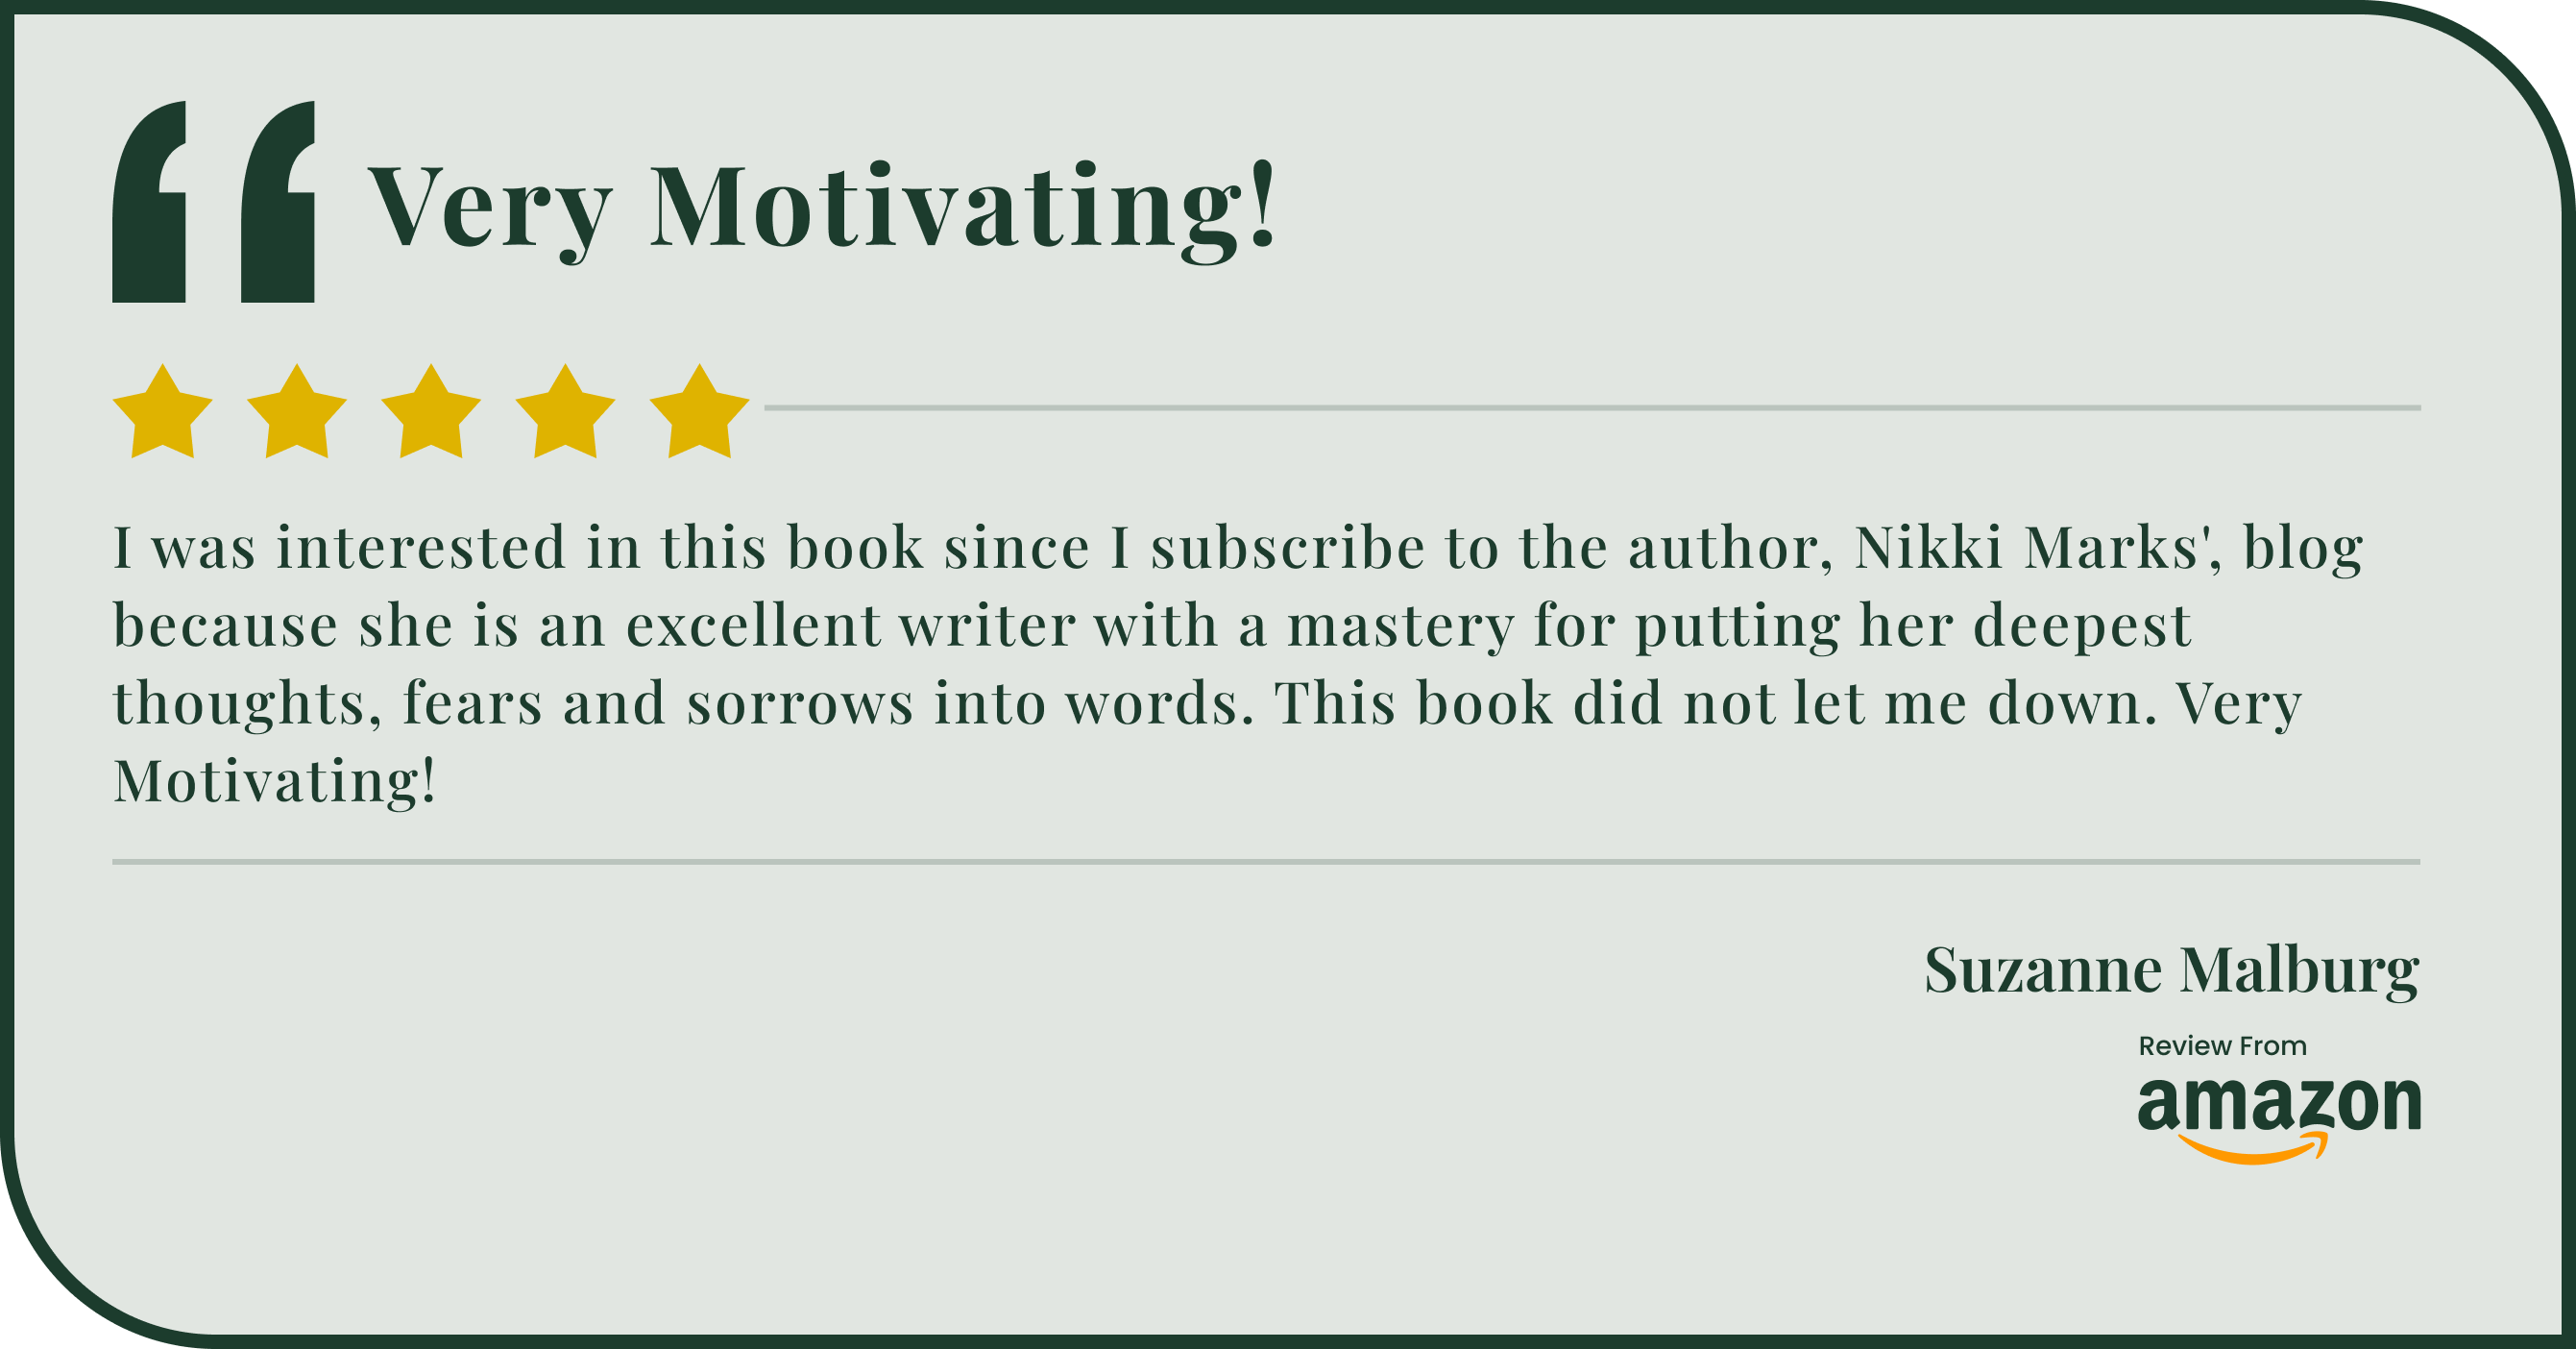 Five-star book review titled "Very Motivating!